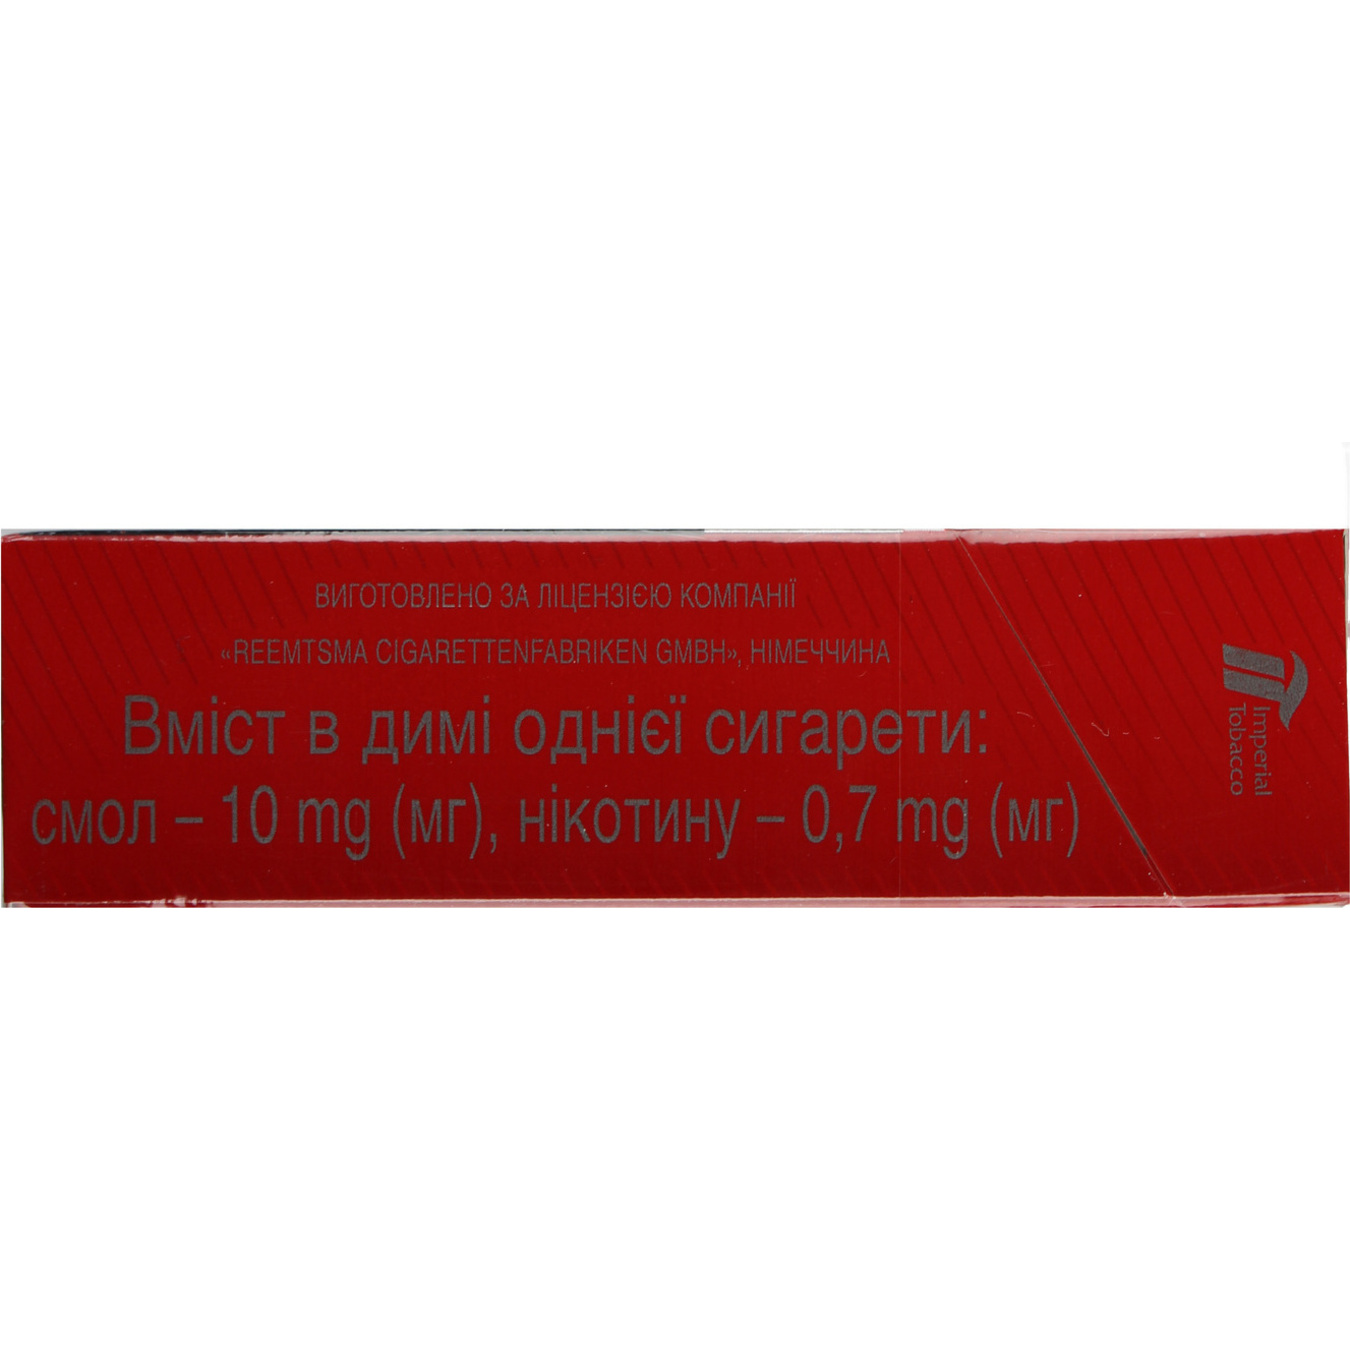 Cigarettes West Original Blend Red XL 25pcs (the price is indicated without excise tax) 2